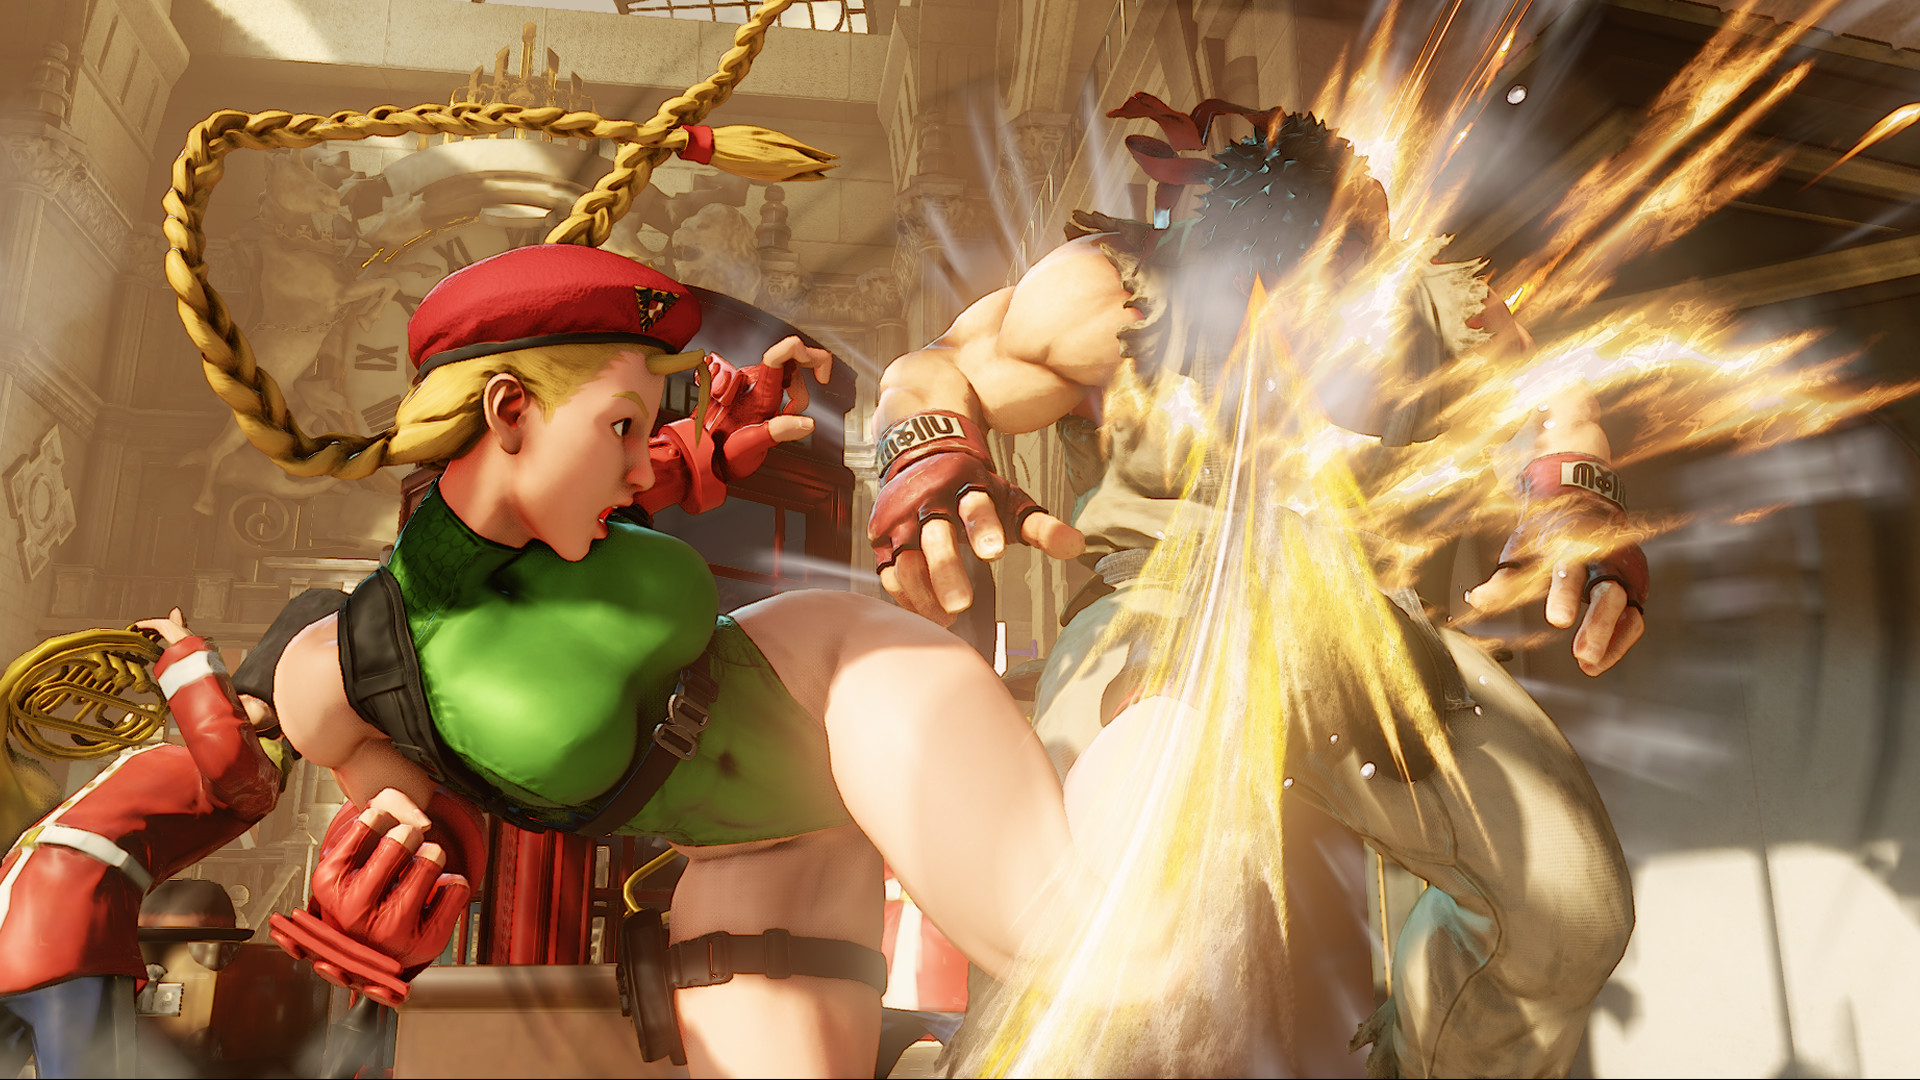 1920x1080 ... Cammy in The Street Fighter wallpapers (59 Wallpapers) – HD Wallpapers  ...